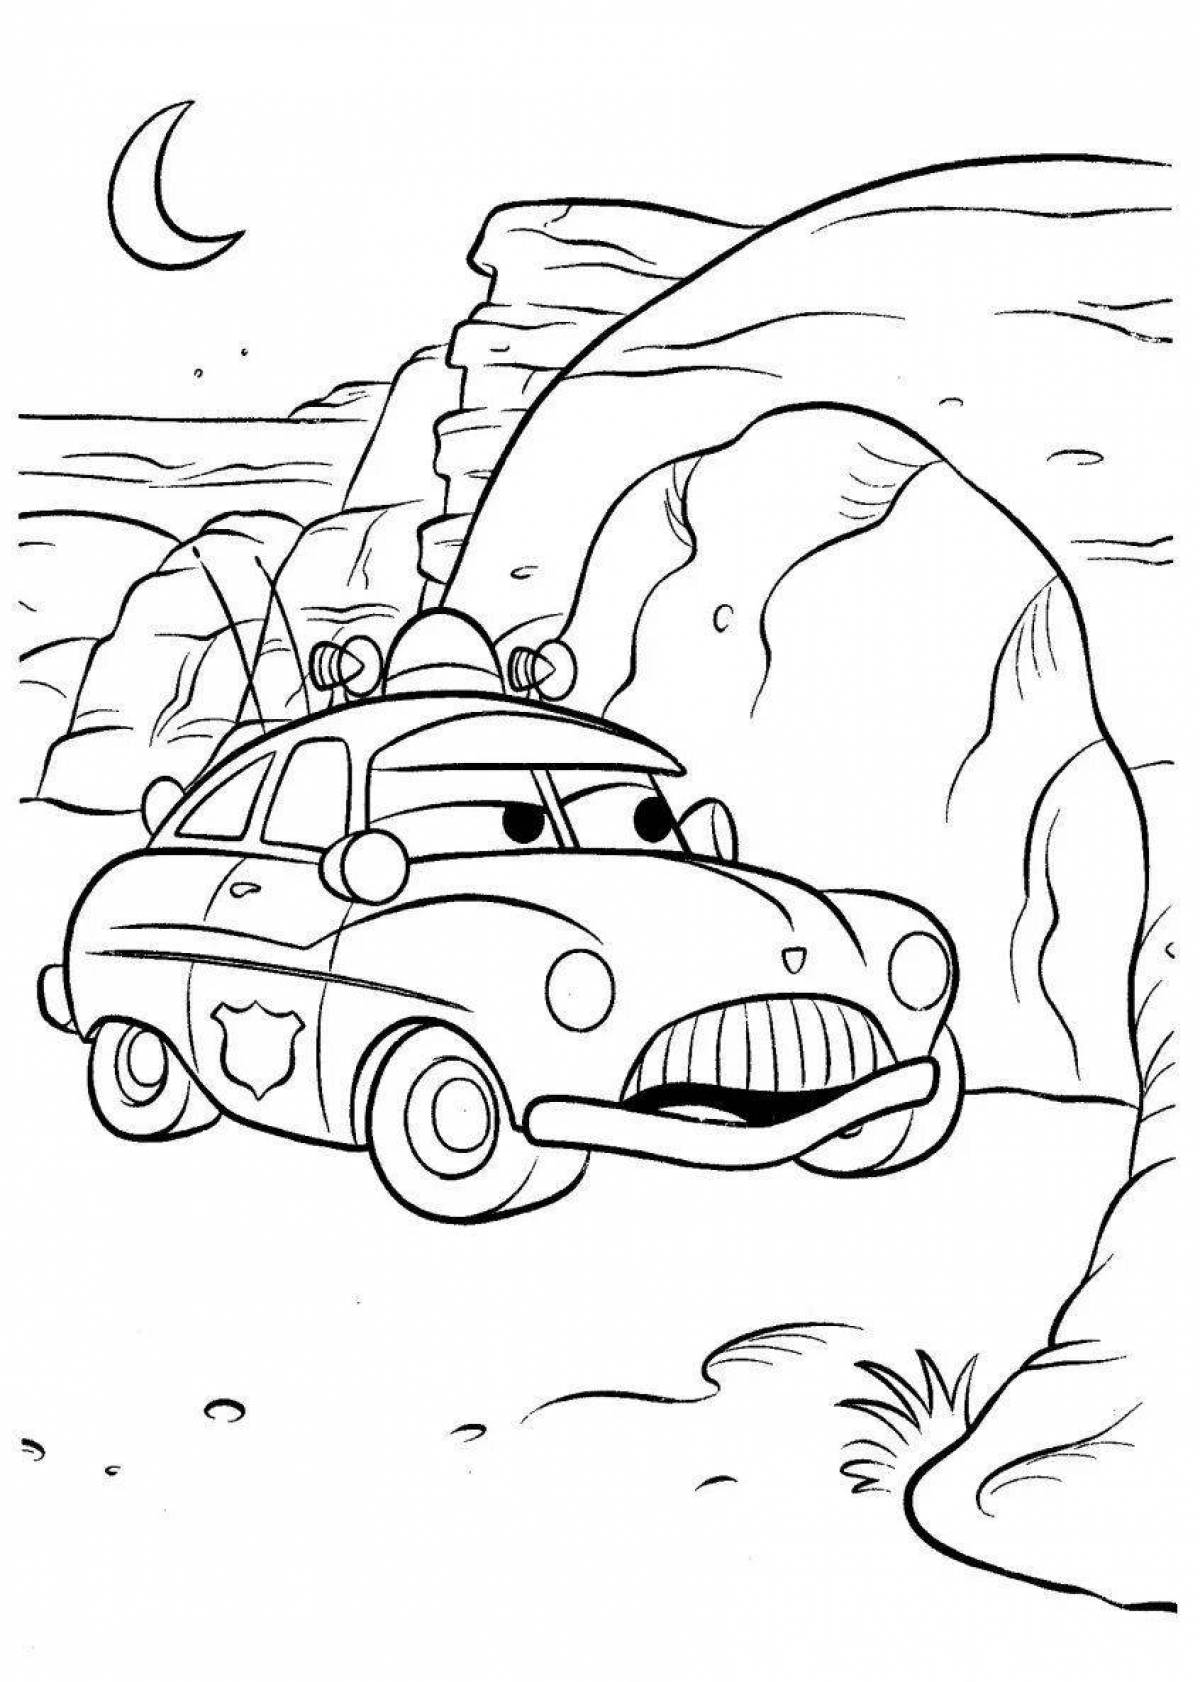 Coloring page unusual sheriff's car